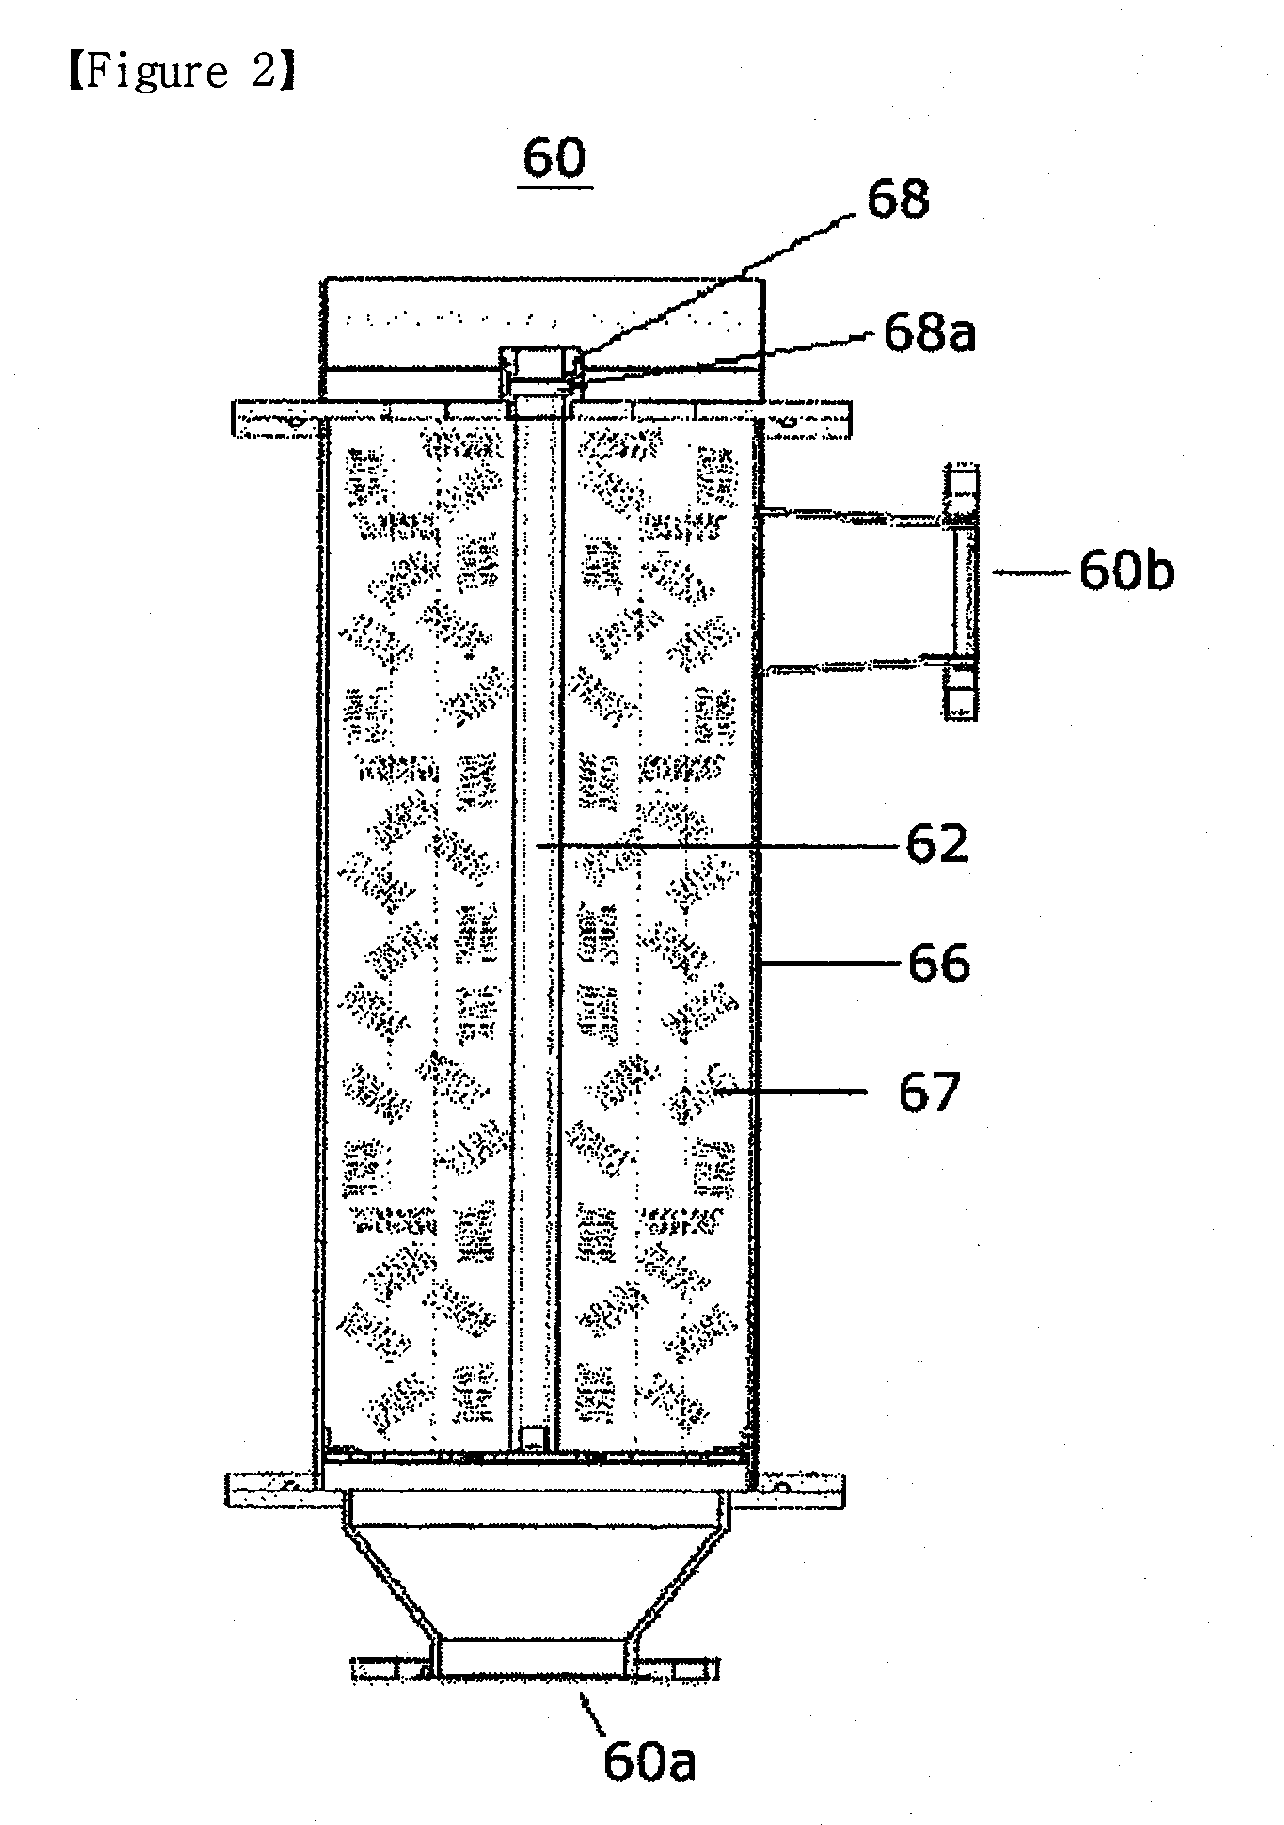 Water treatment system and method using high pressure advanced oxidation process with unreacted ozone reusing